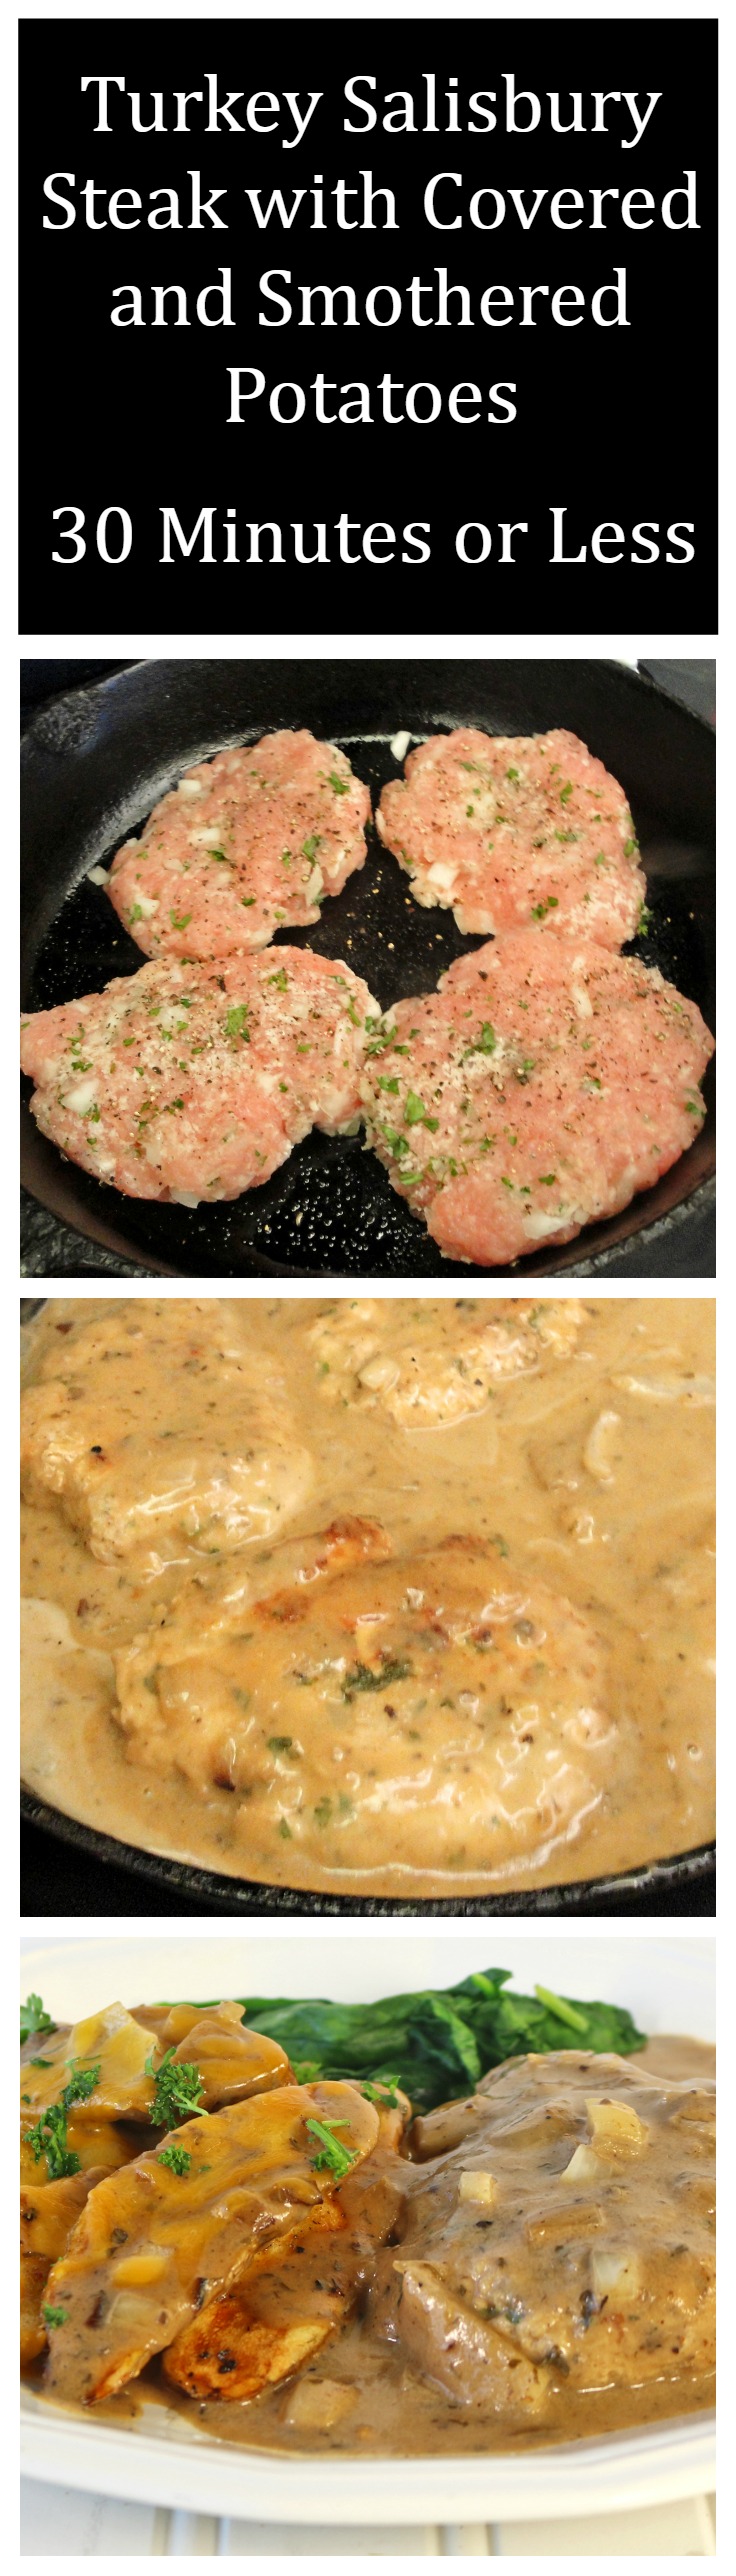 Turkey Salisbury Steak with Covered and Smoothered Potatoes